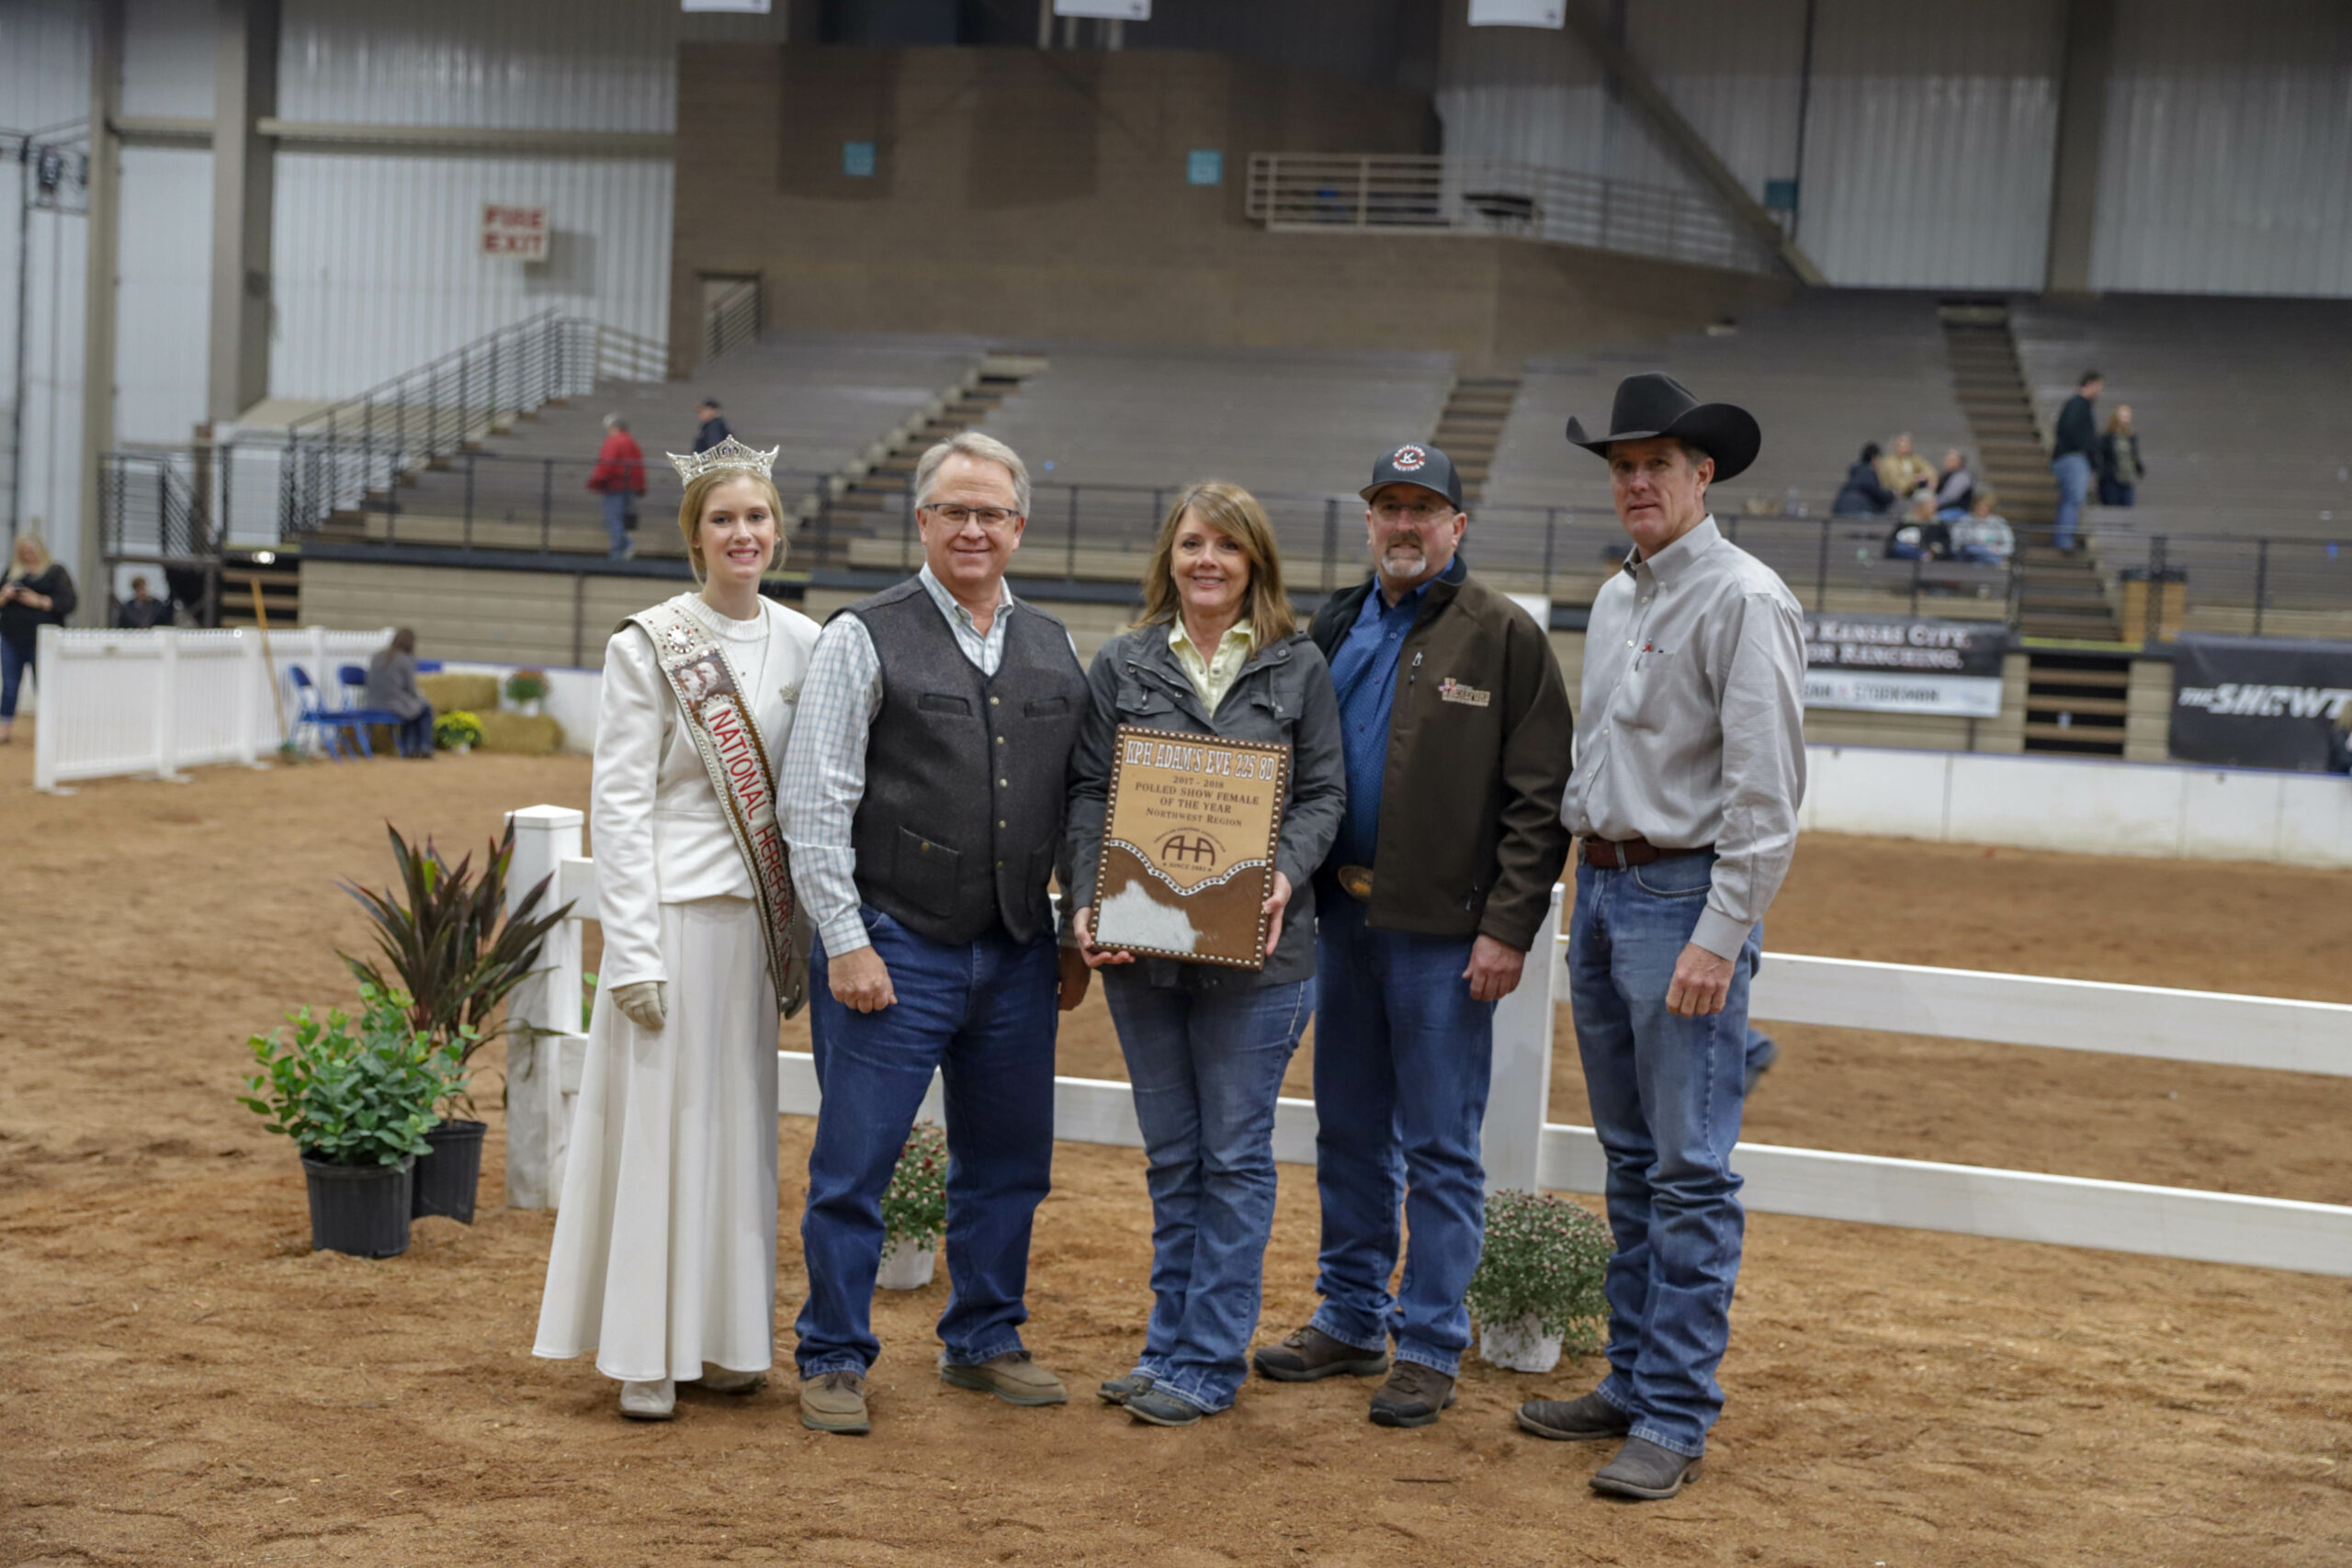 Hereford Show Awards Presented in Kansas City